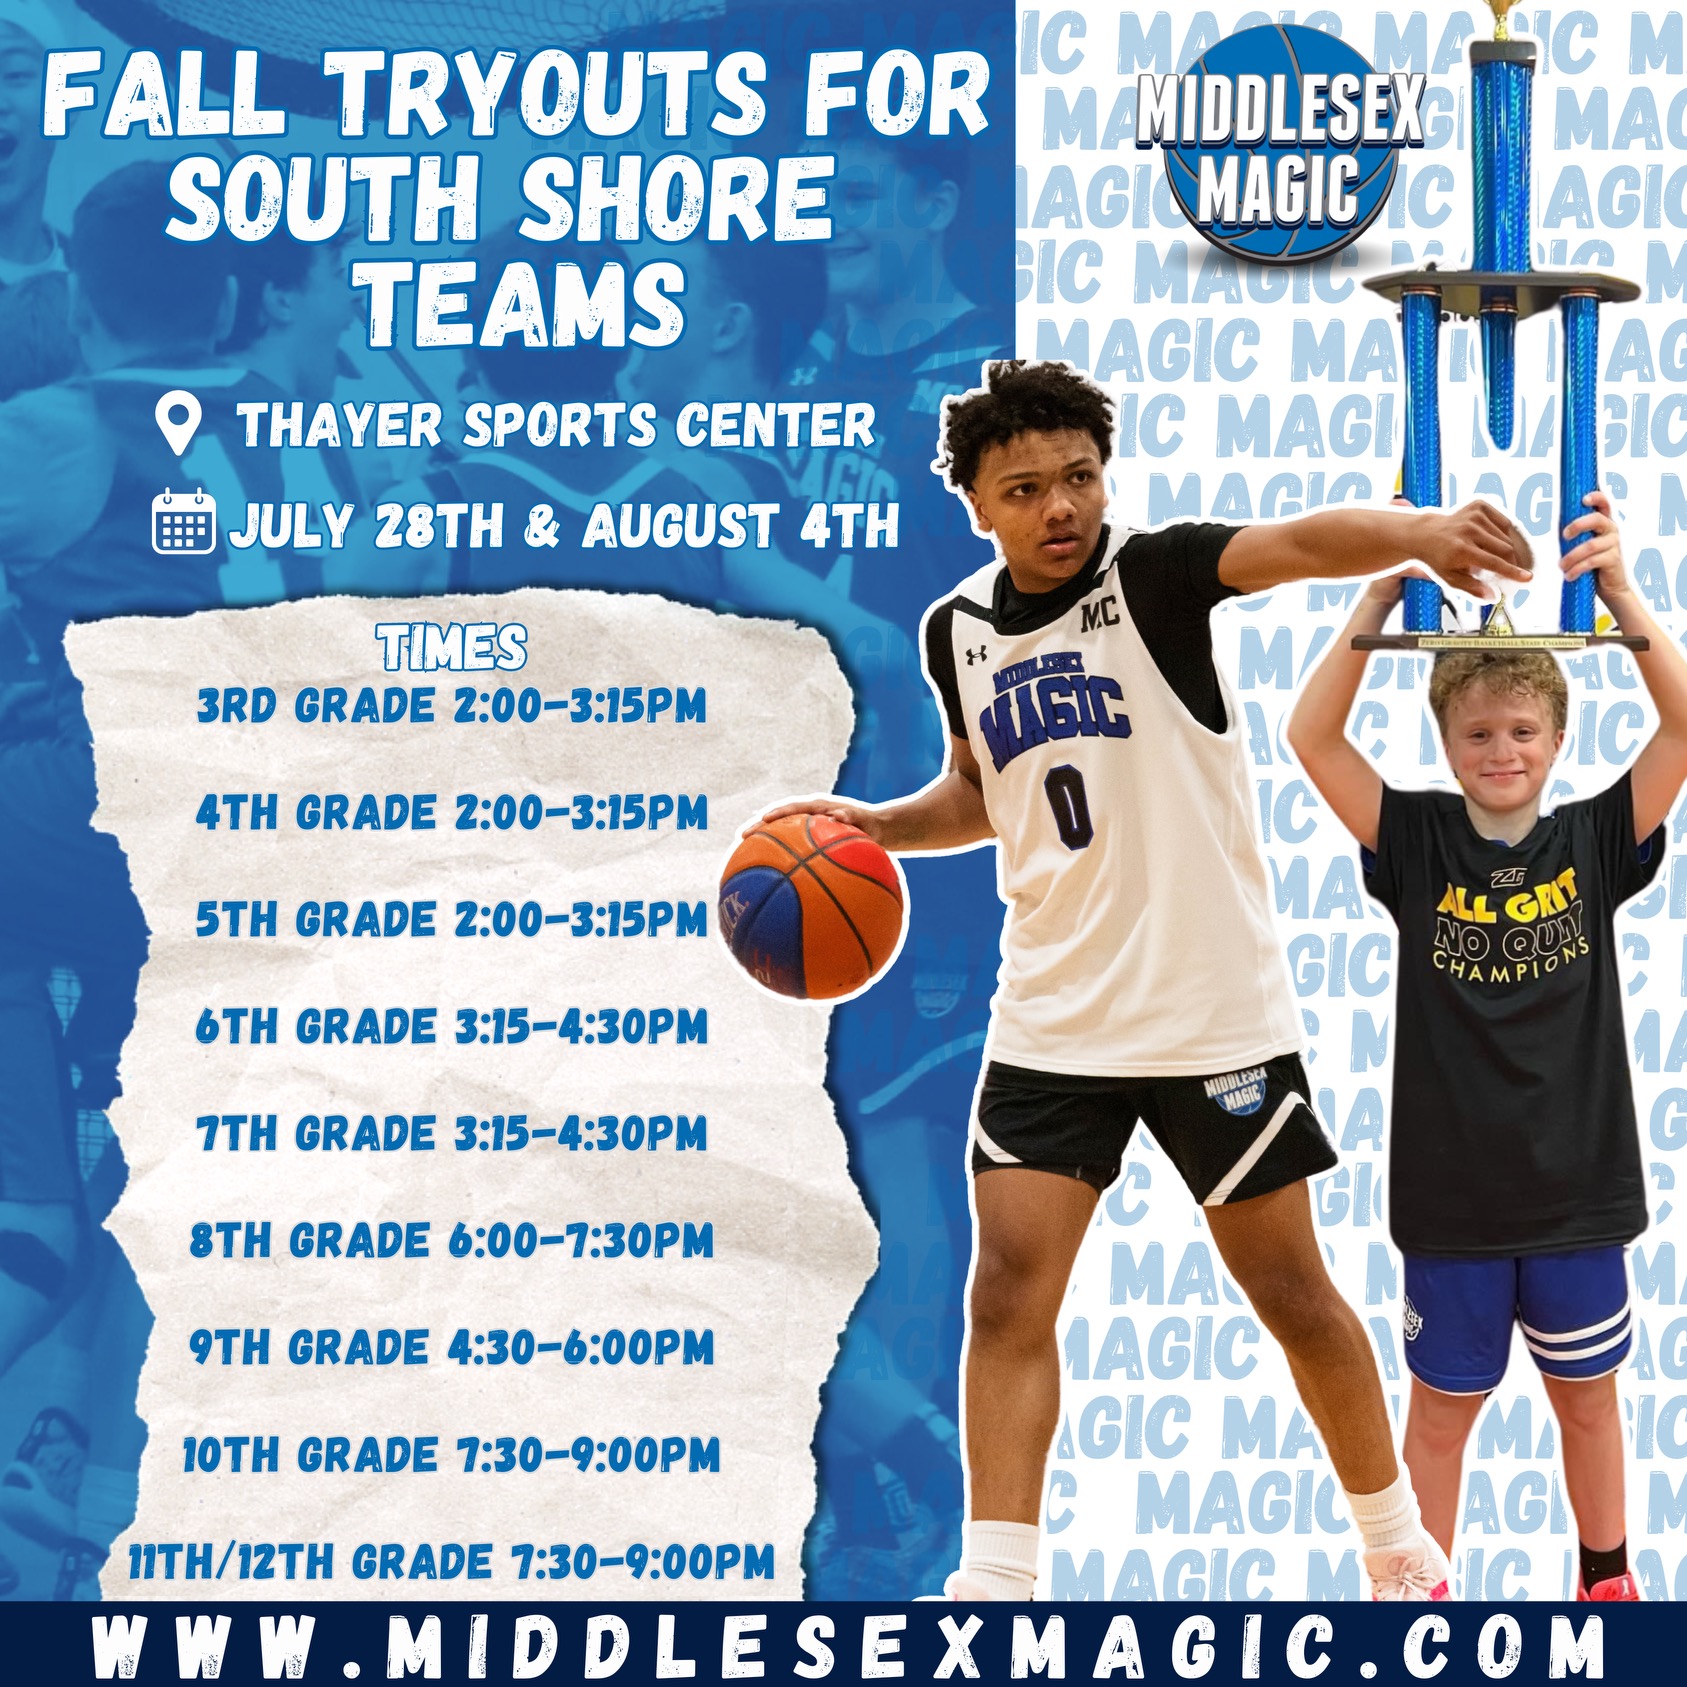 Middlesex Magic Fall Tryouts - 1